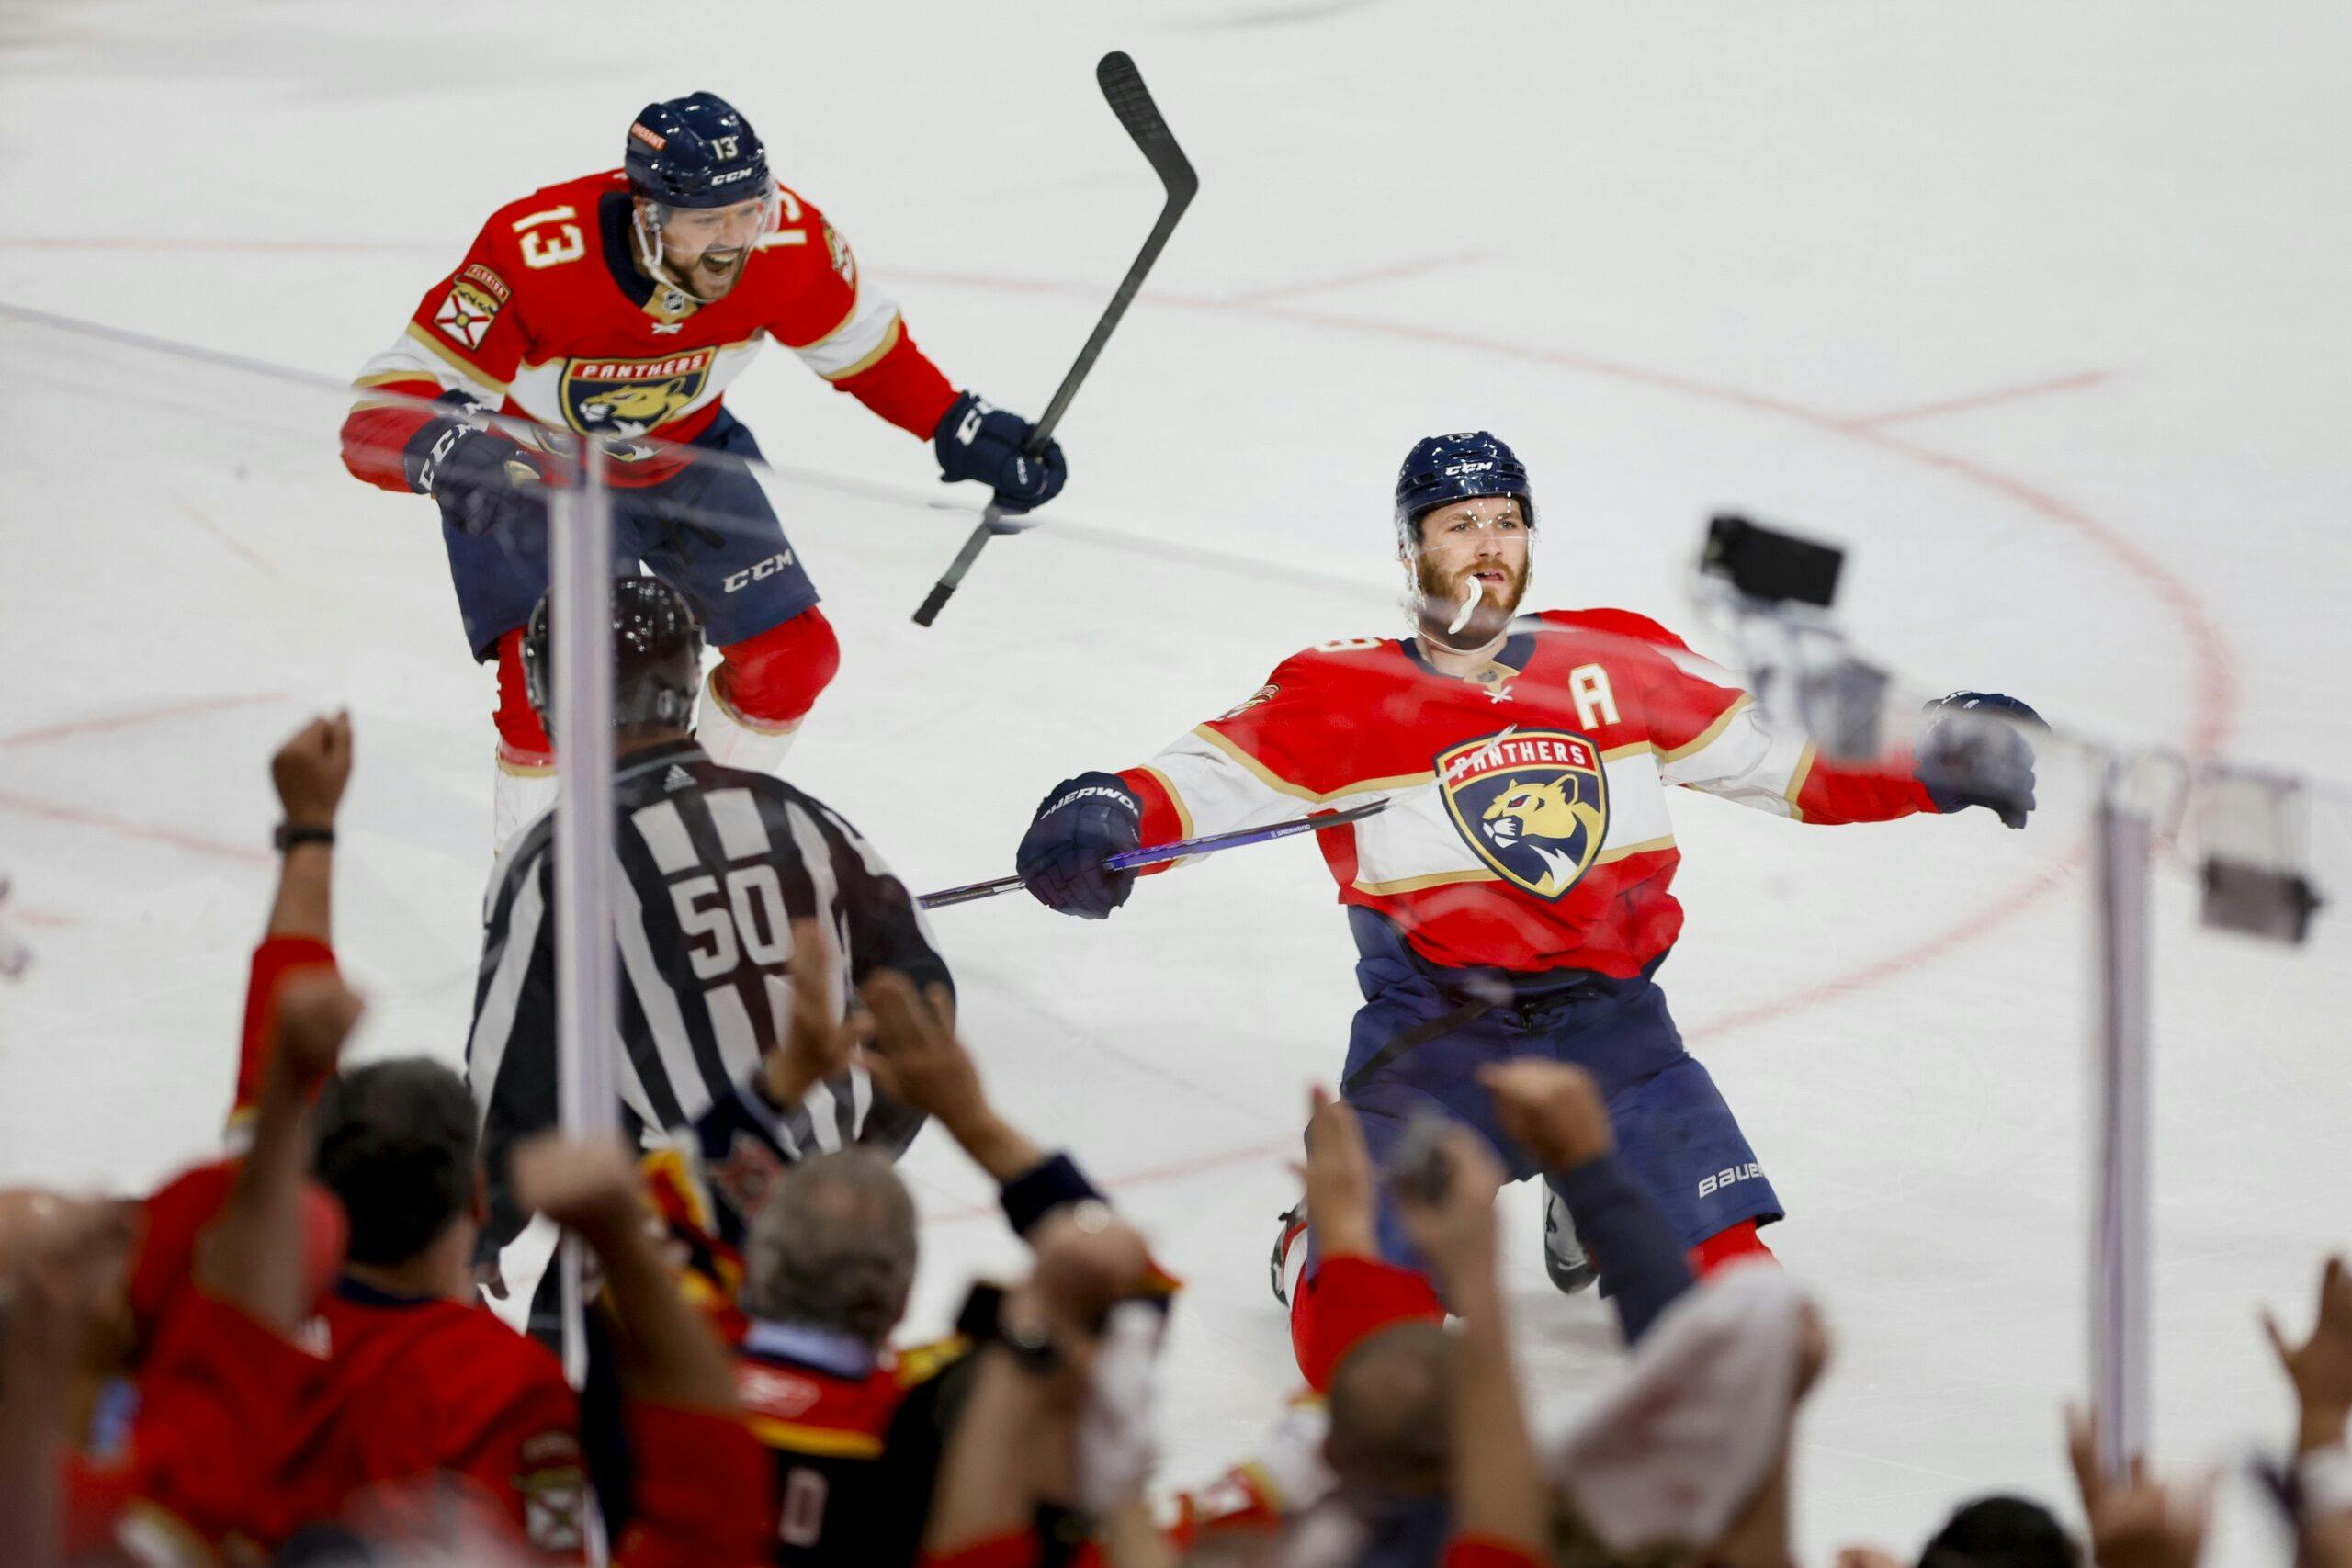 Stanley Cup Playoffs Day 37: Tkachuk scores game-winner with 4.9 seconds left to send Panthers to Stanley Cup Final